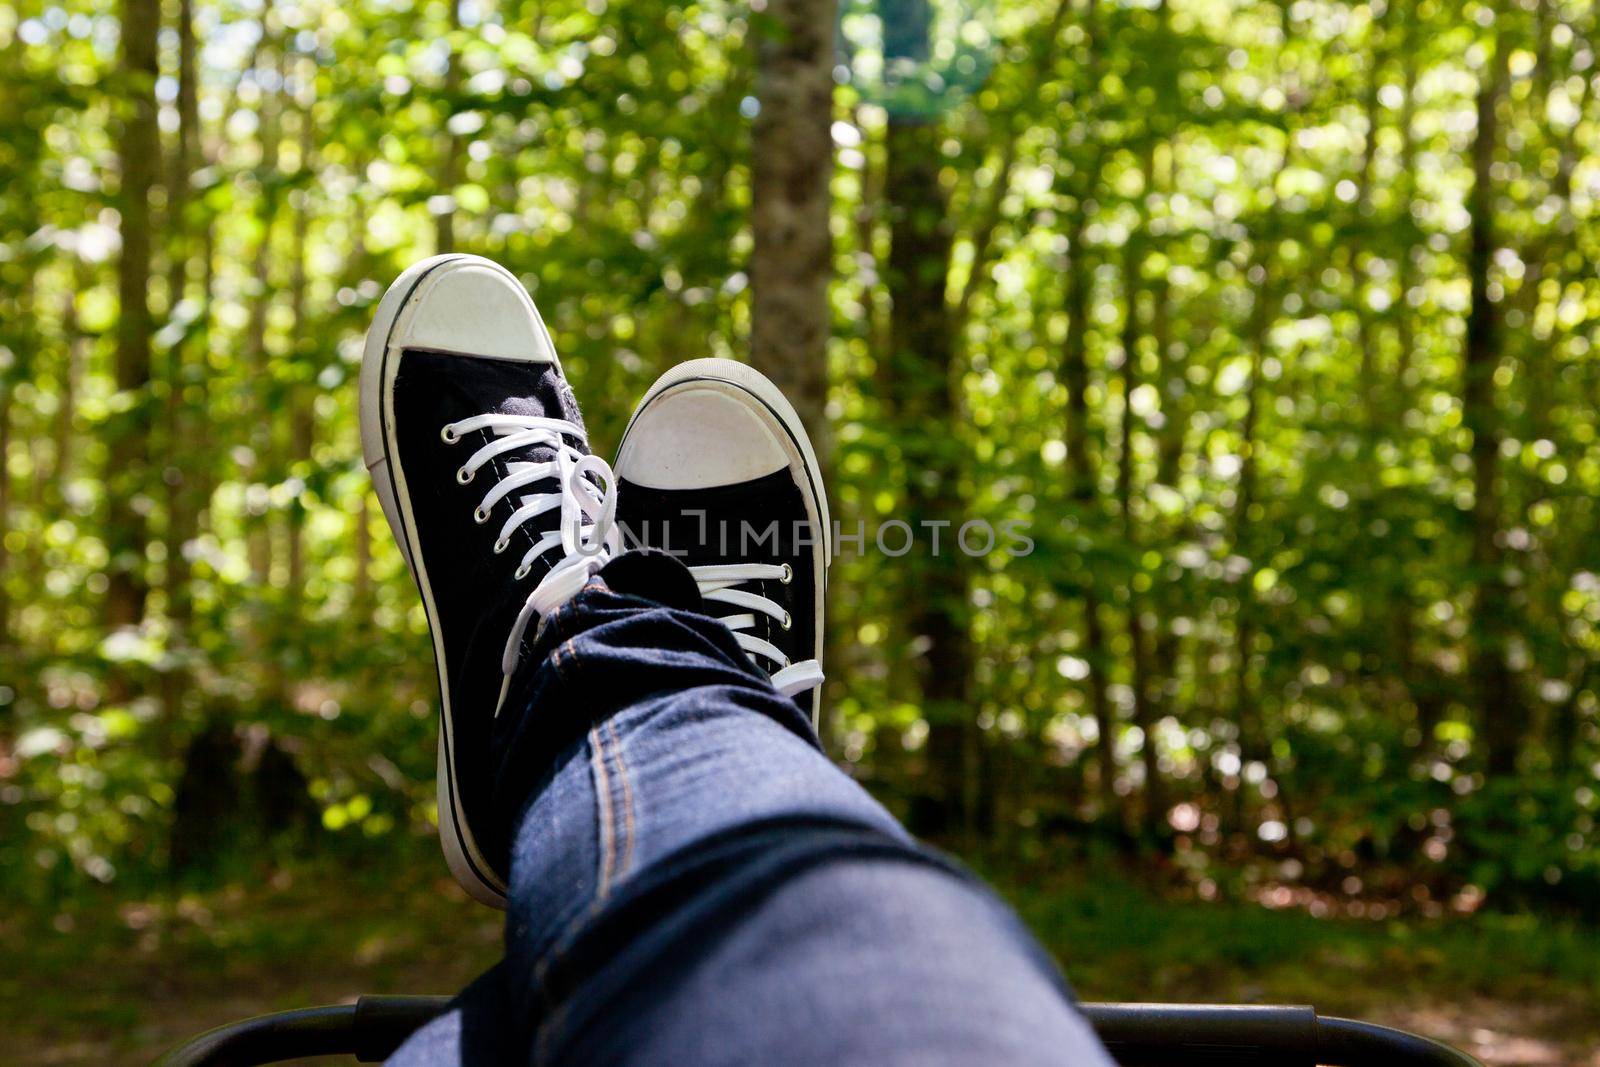 Sneakers are up, a person is relaxed at their camp site in the forest or woods 